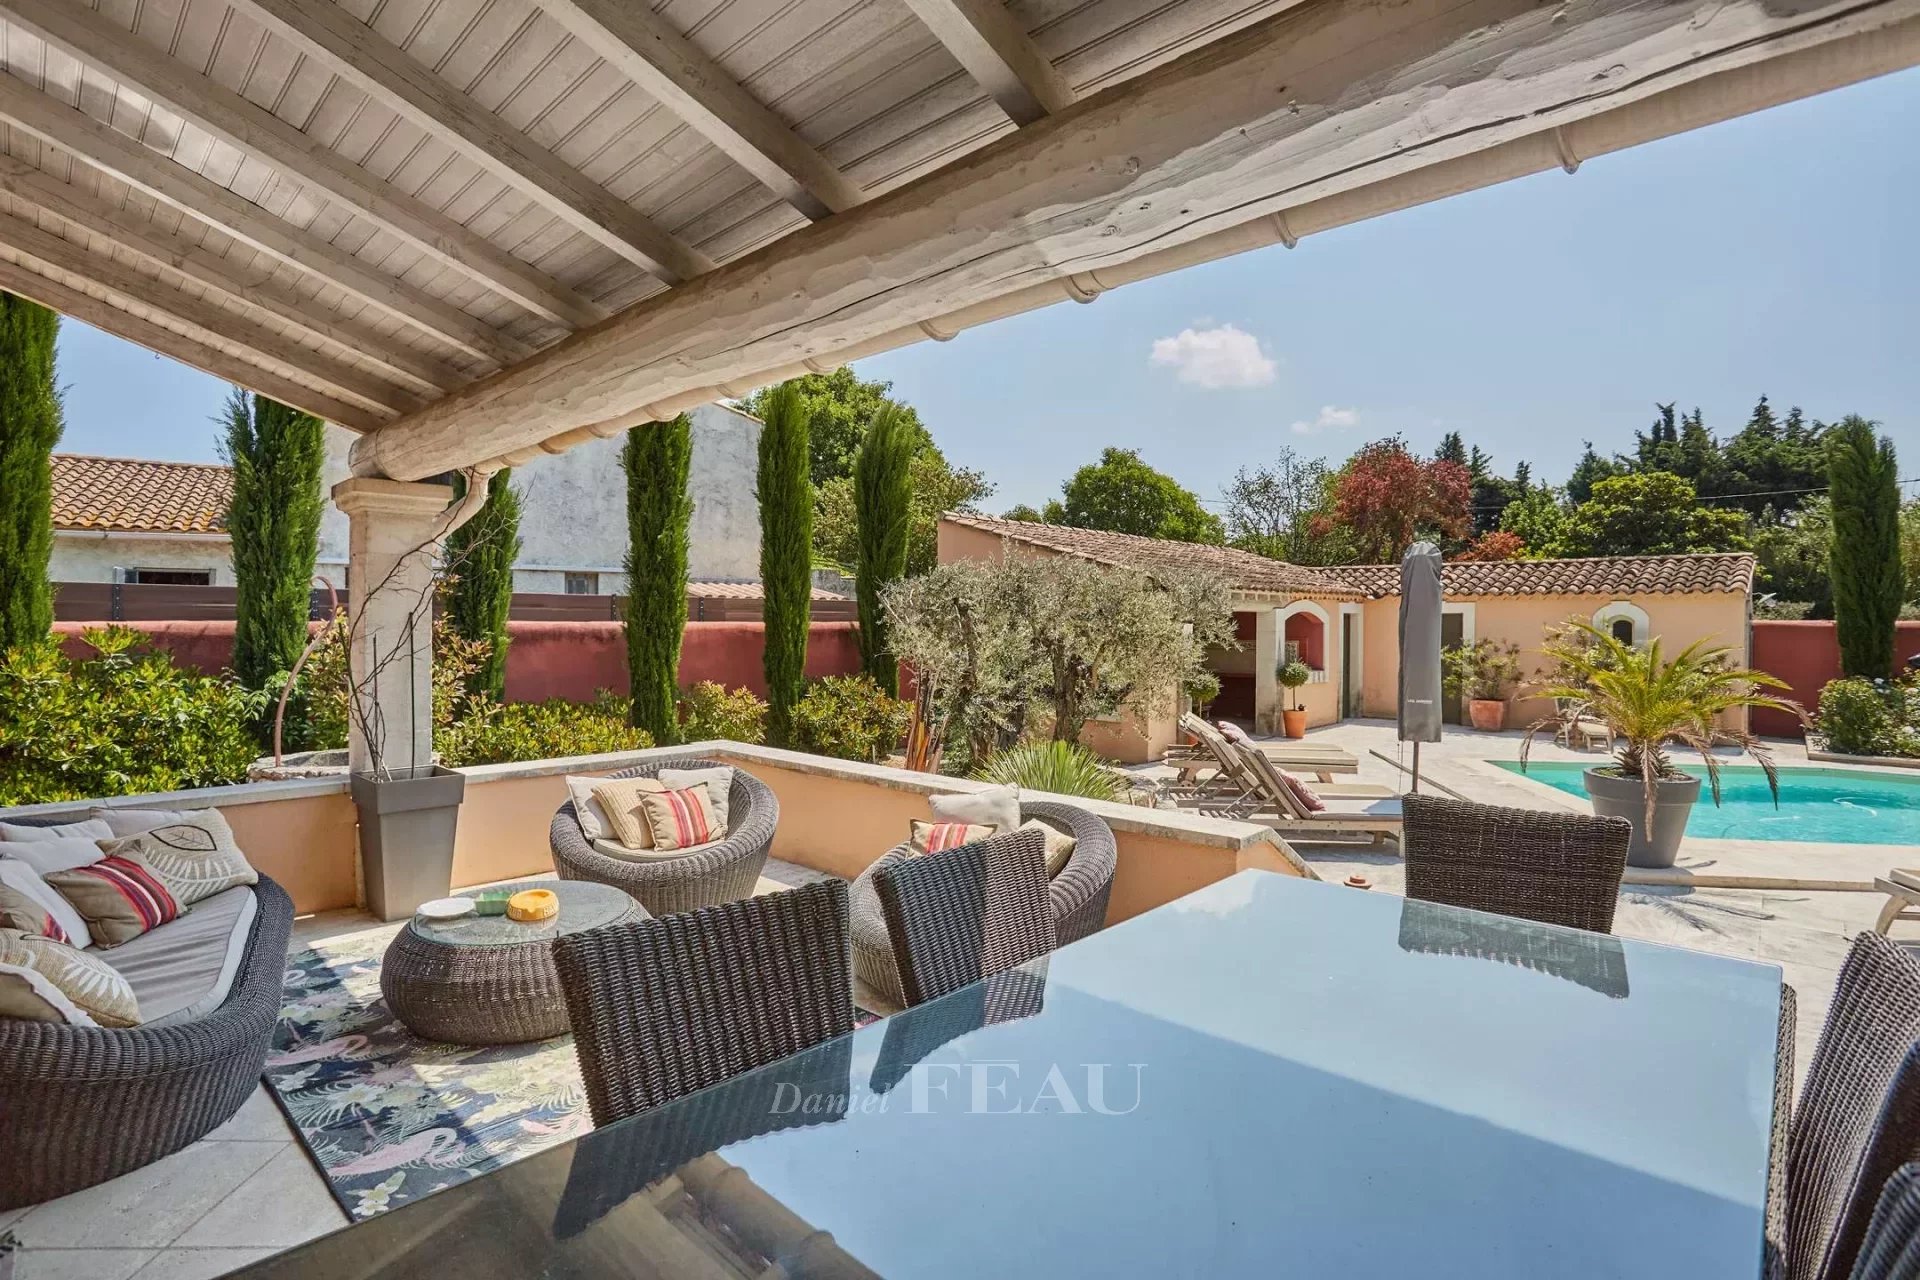 A villa a 10-minute walk from the centre of Saint Remy de Provence  Sleeps 10